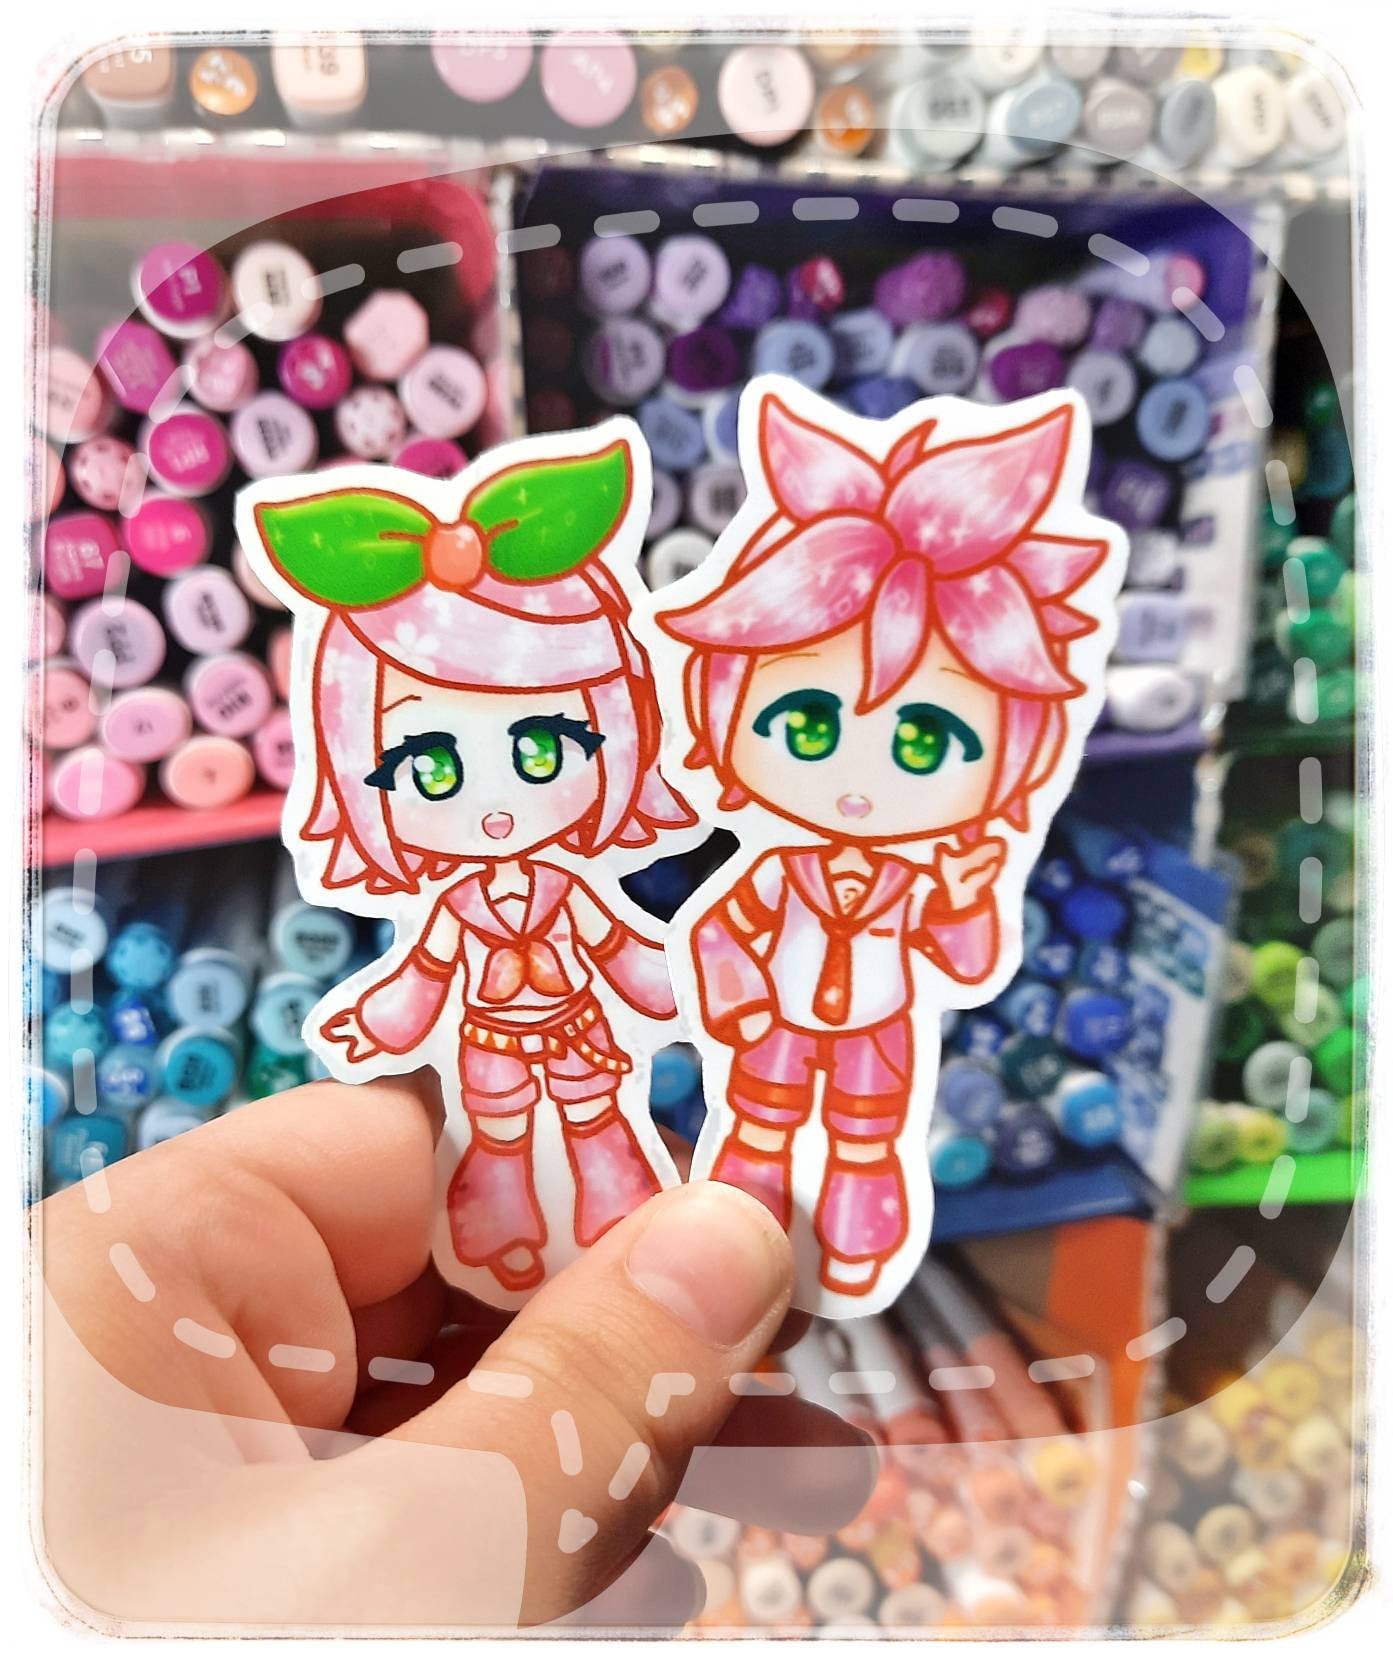 Vocaloid Rin and Len Holographic and Vinyl Stickers weatherproof Die-cut  Laminated Stickers Cute Kawaii Anime Stickers 